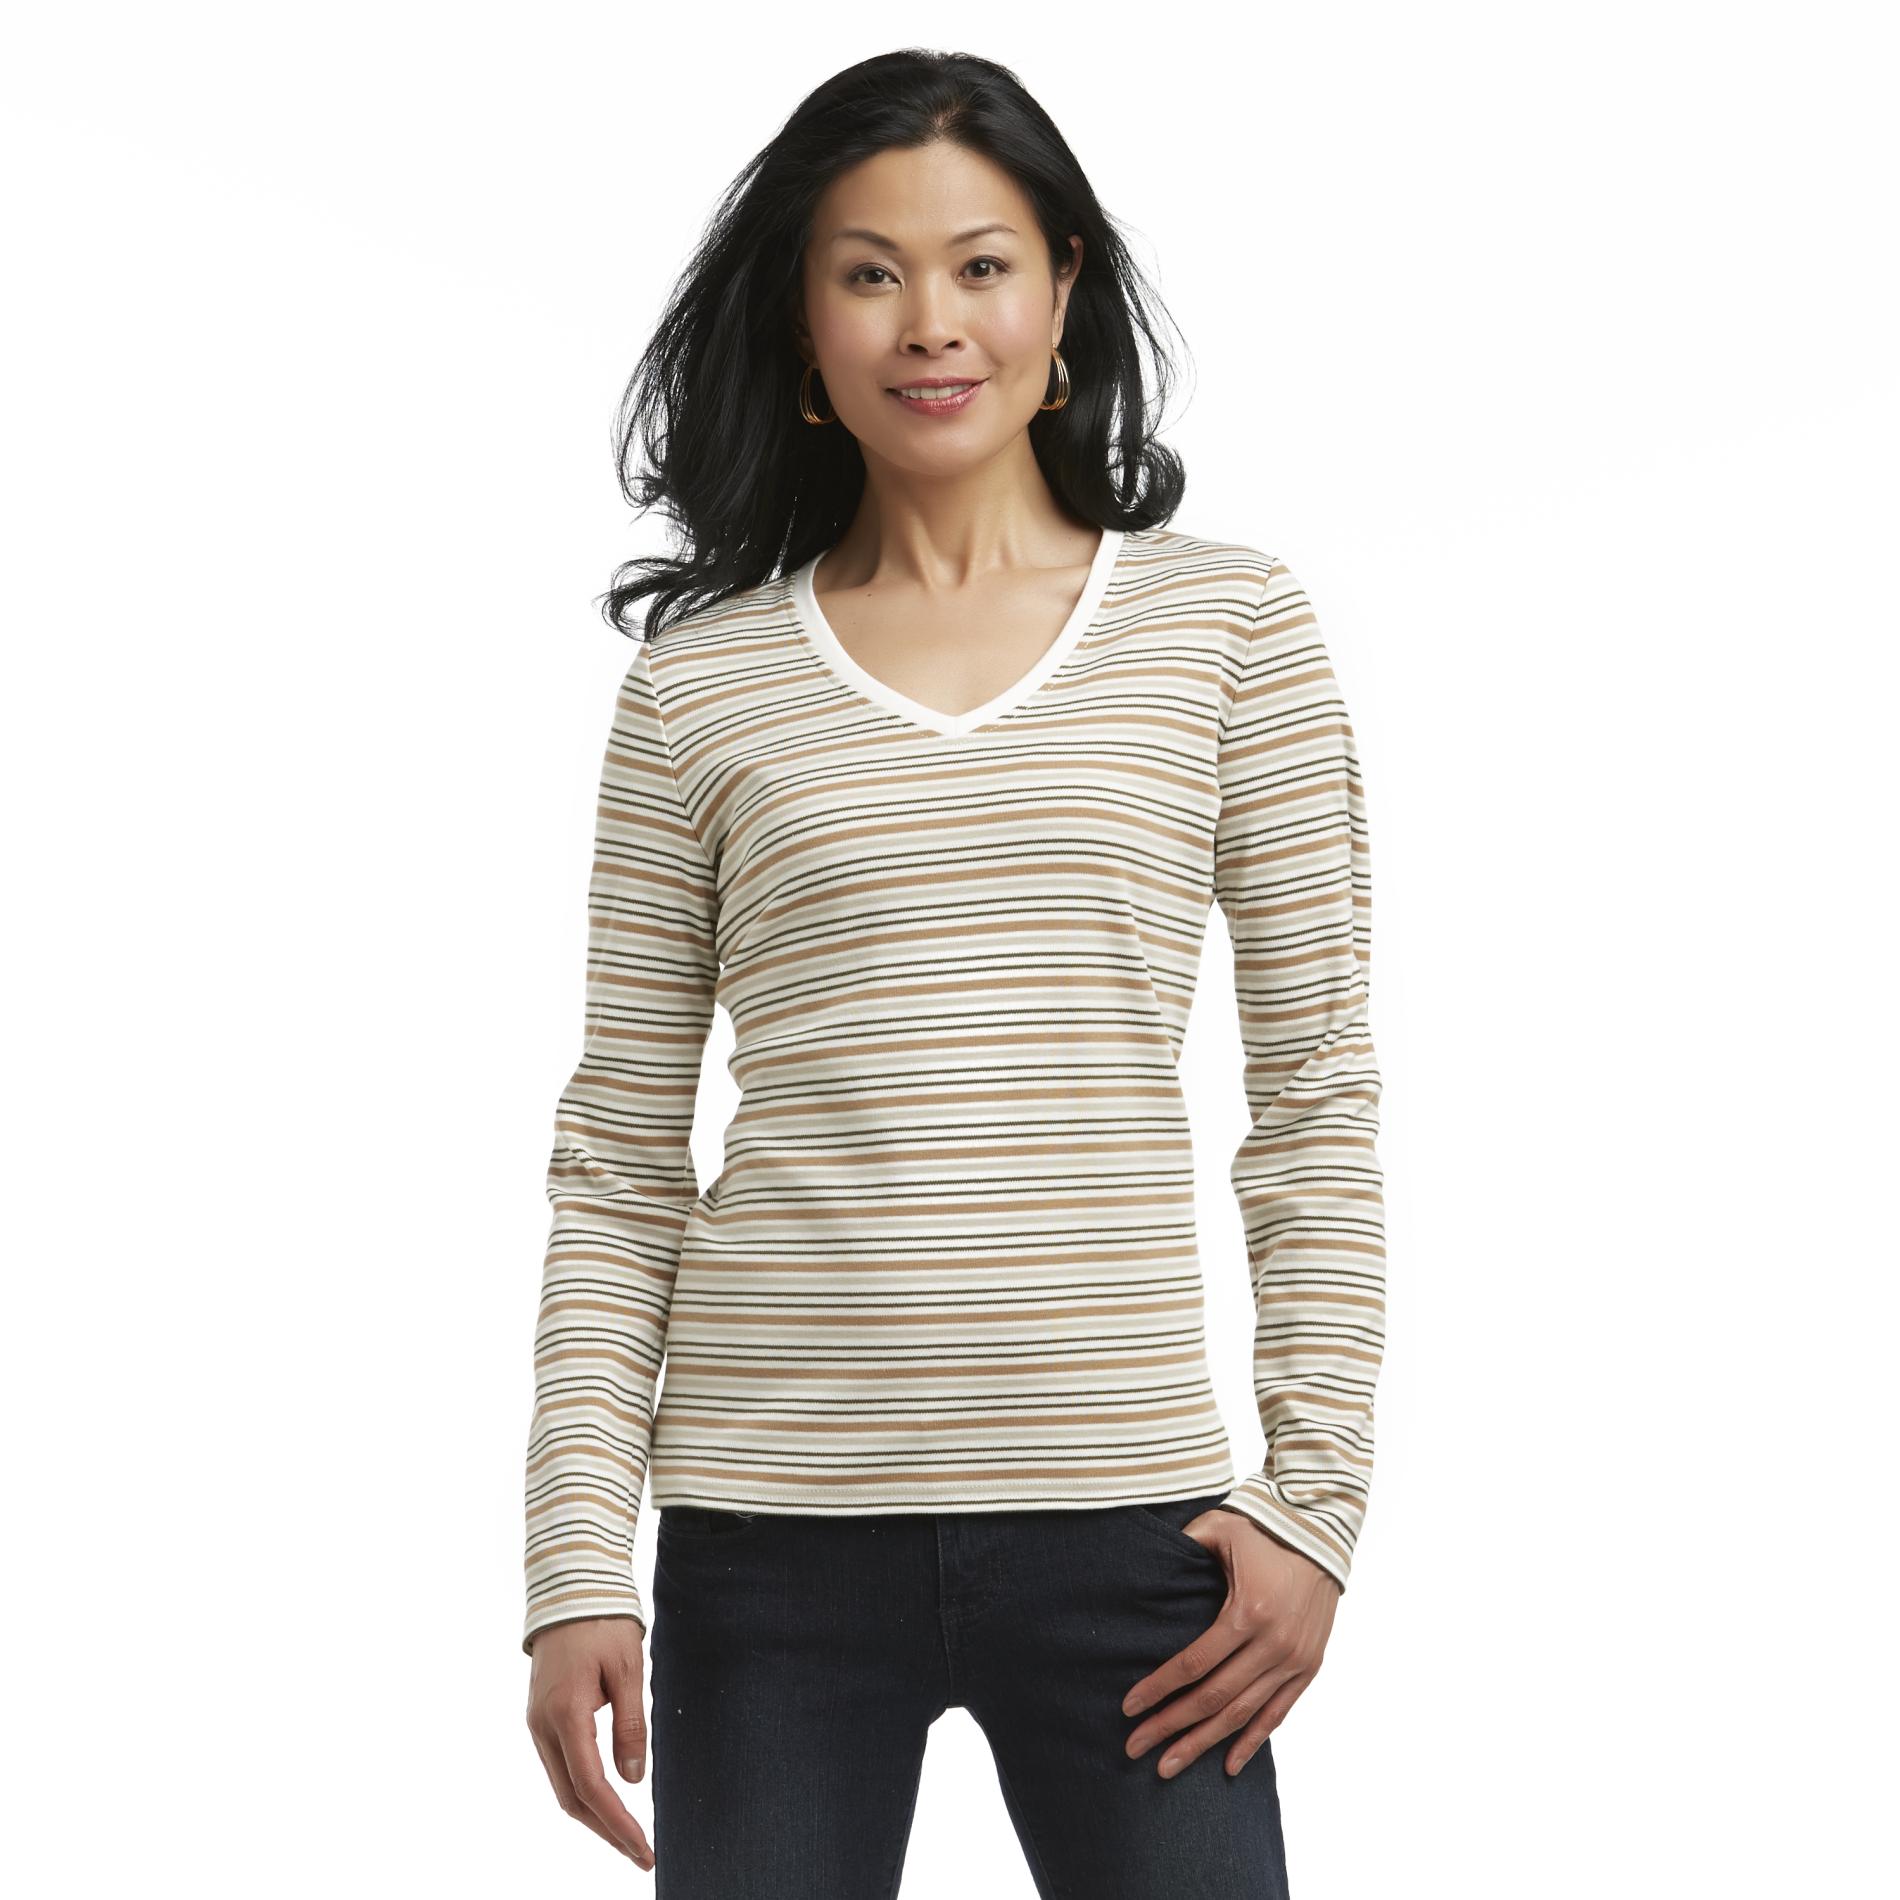 Basic Editions Women's Long-Sleeve V-Neck Knit Top - Striped